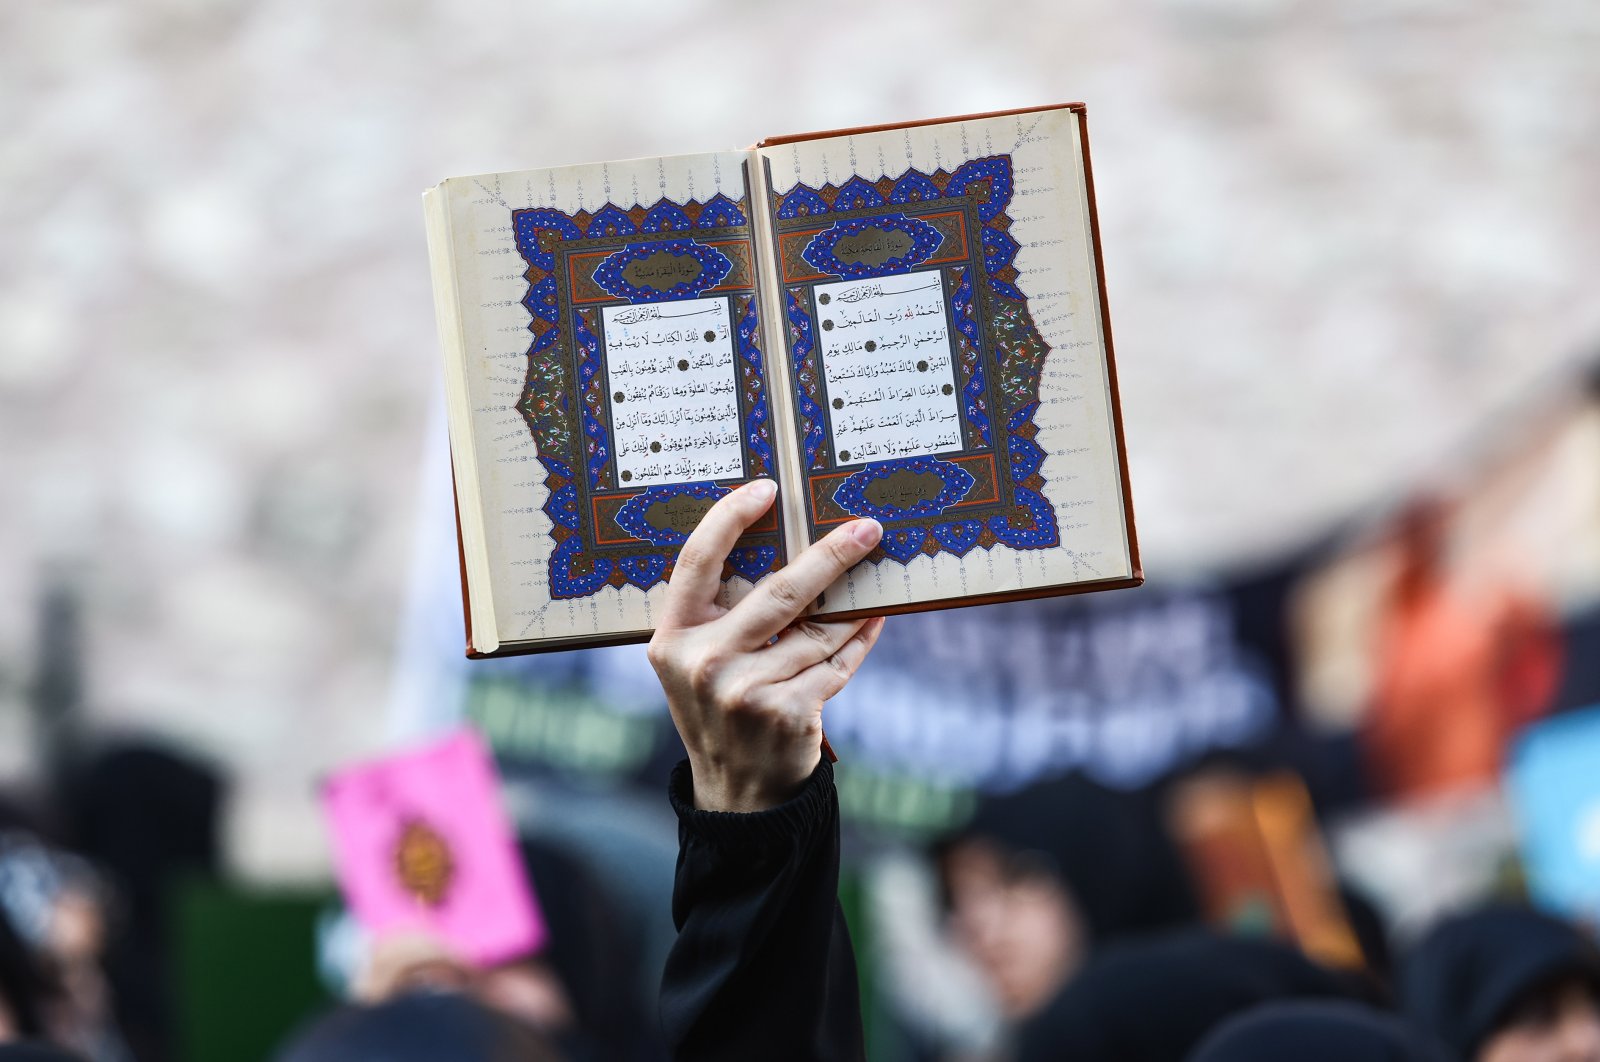 A protester holds a copy of the Quran as they attend a protest against Sweden for allowing anti-Muslim right-wing extremists to desecrate and burn copies of the Muslim holy book in Stockholm and Copenhagen, in front of the Consulate General of Sweden in Istanbul, Türkiye, July 30, 2023. (EPA Photo)